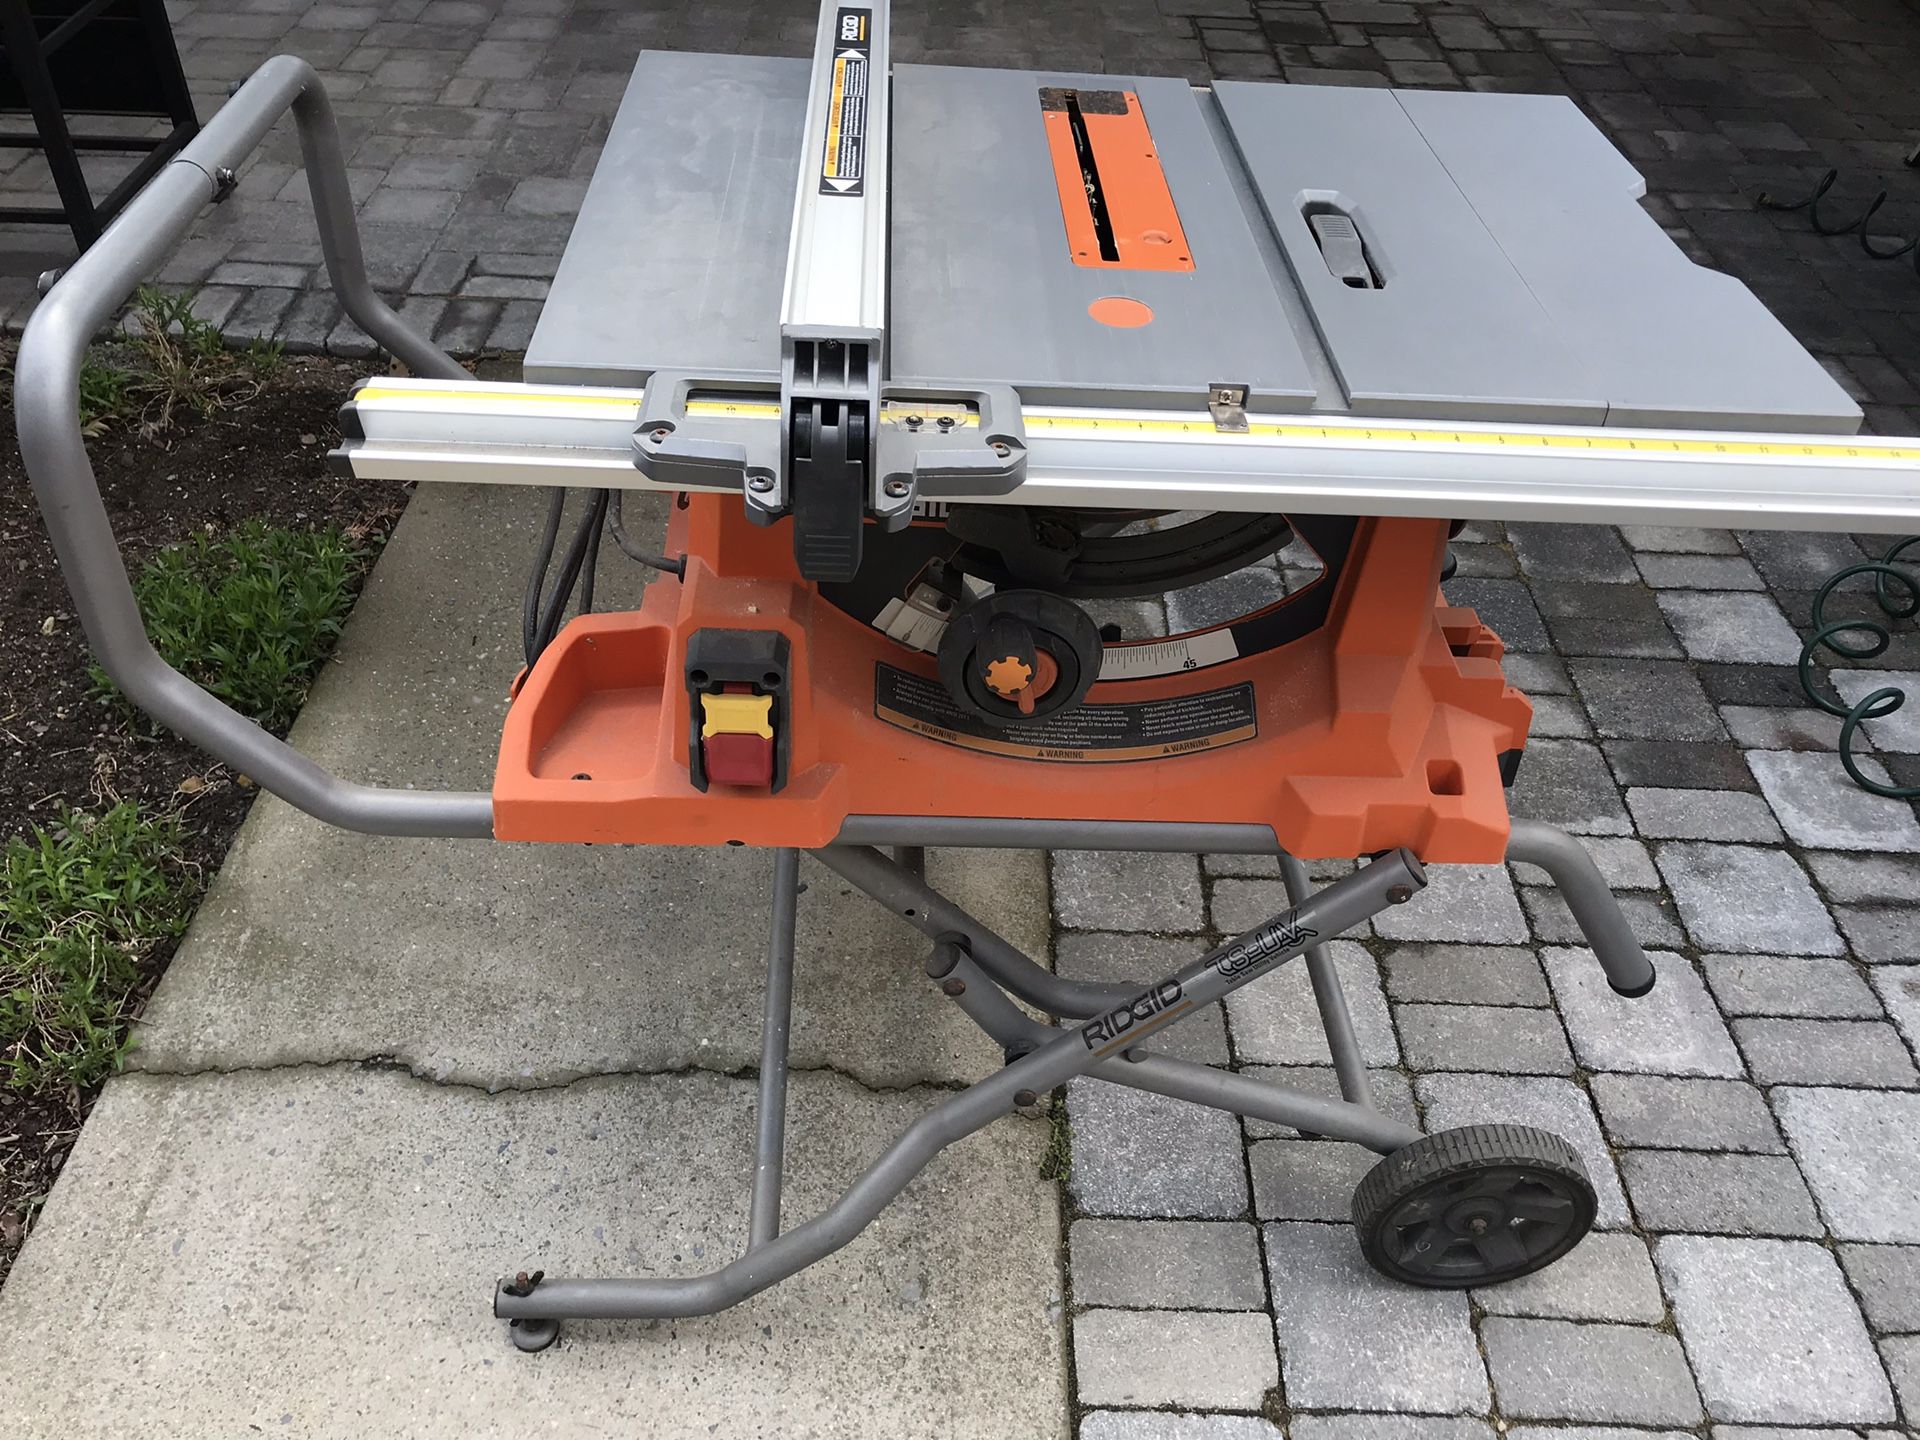 Ridgid r4513 Heavy Duty 10 in. Portable Table Saw With Stand like new